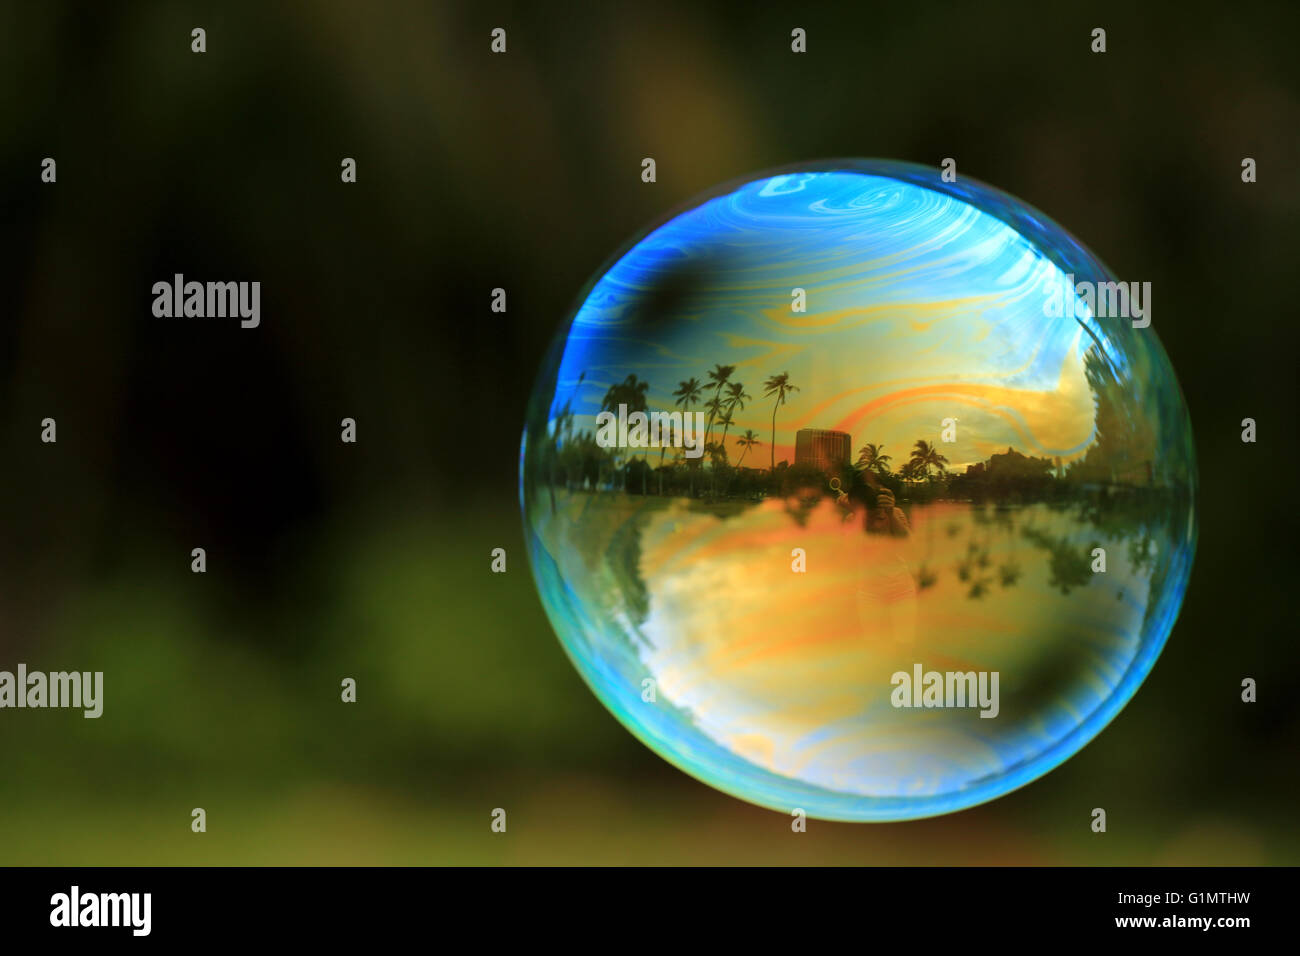 Floating colorful soap bubble with palms reflection, macro Stock Photo